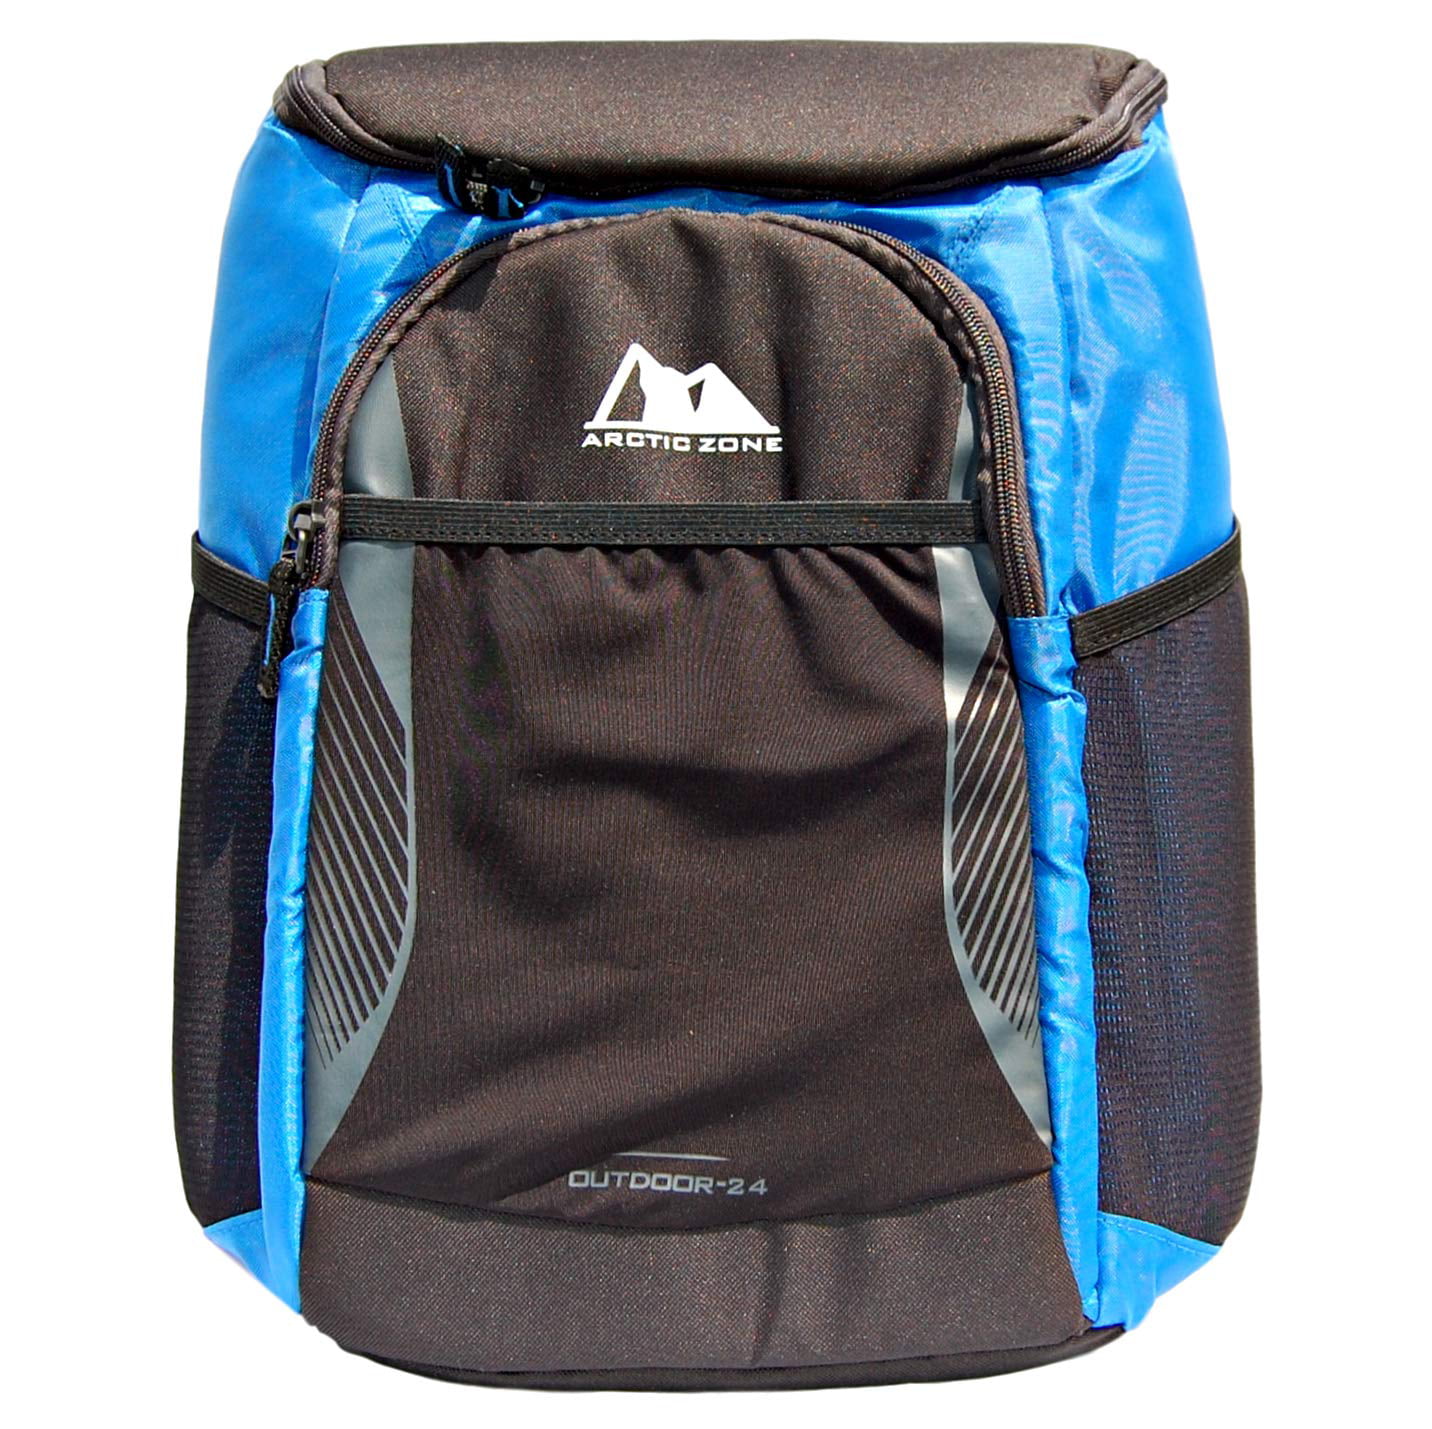 Arctic Zone Backpack Outdoor Cooler 24 Can Capacity, Black and Blue Color - Walmart.com ...